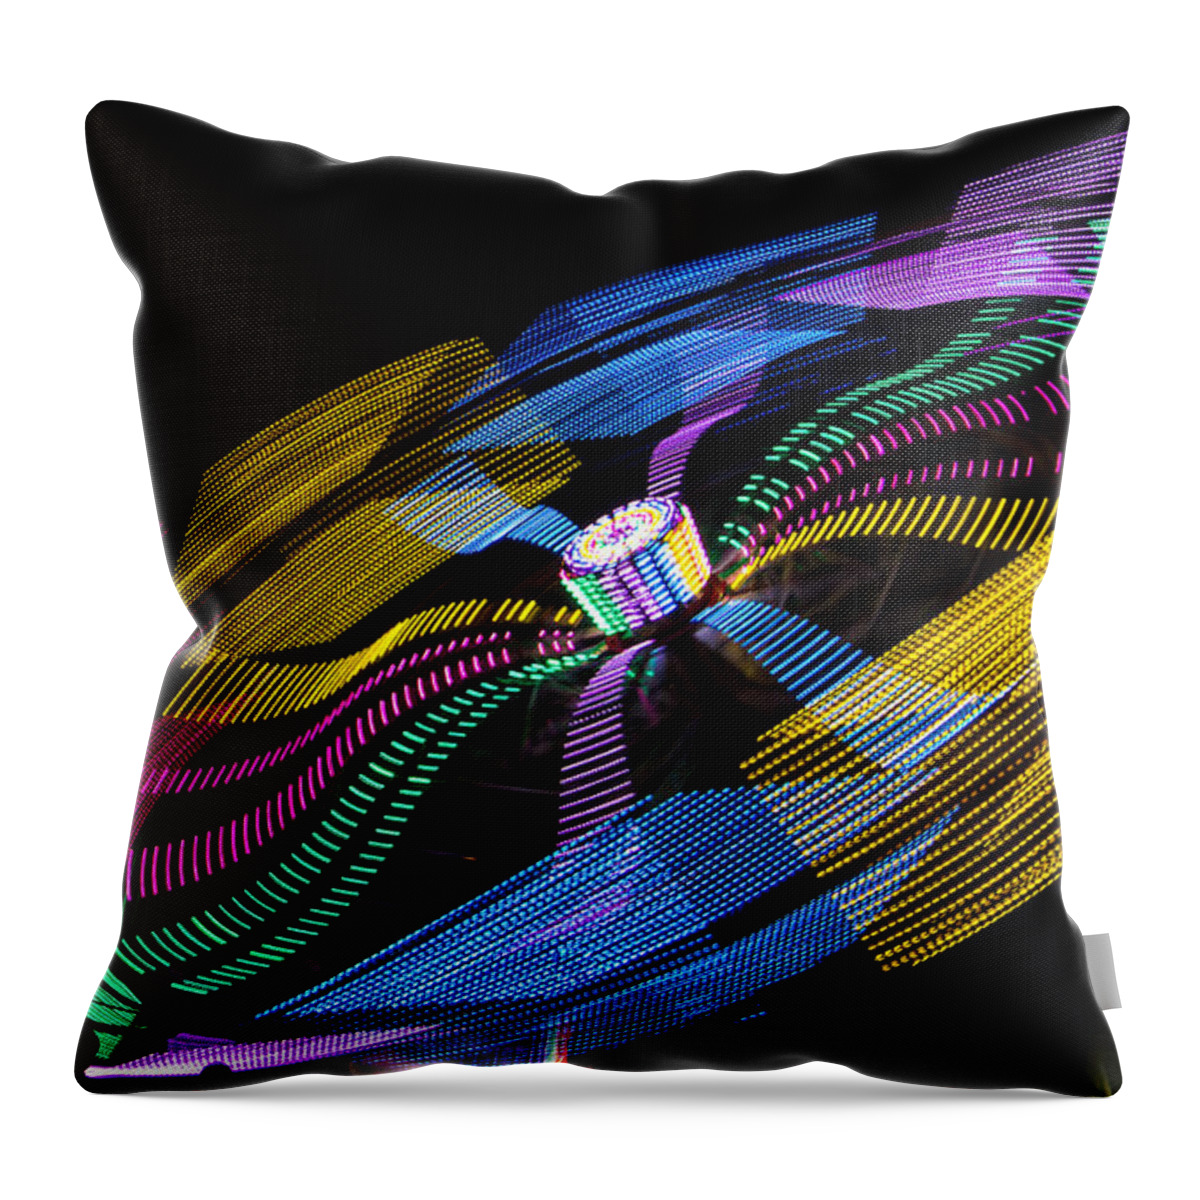 Made In America Throw Pillow featuring the photograph Tilt A Whirl by Steven Bateson